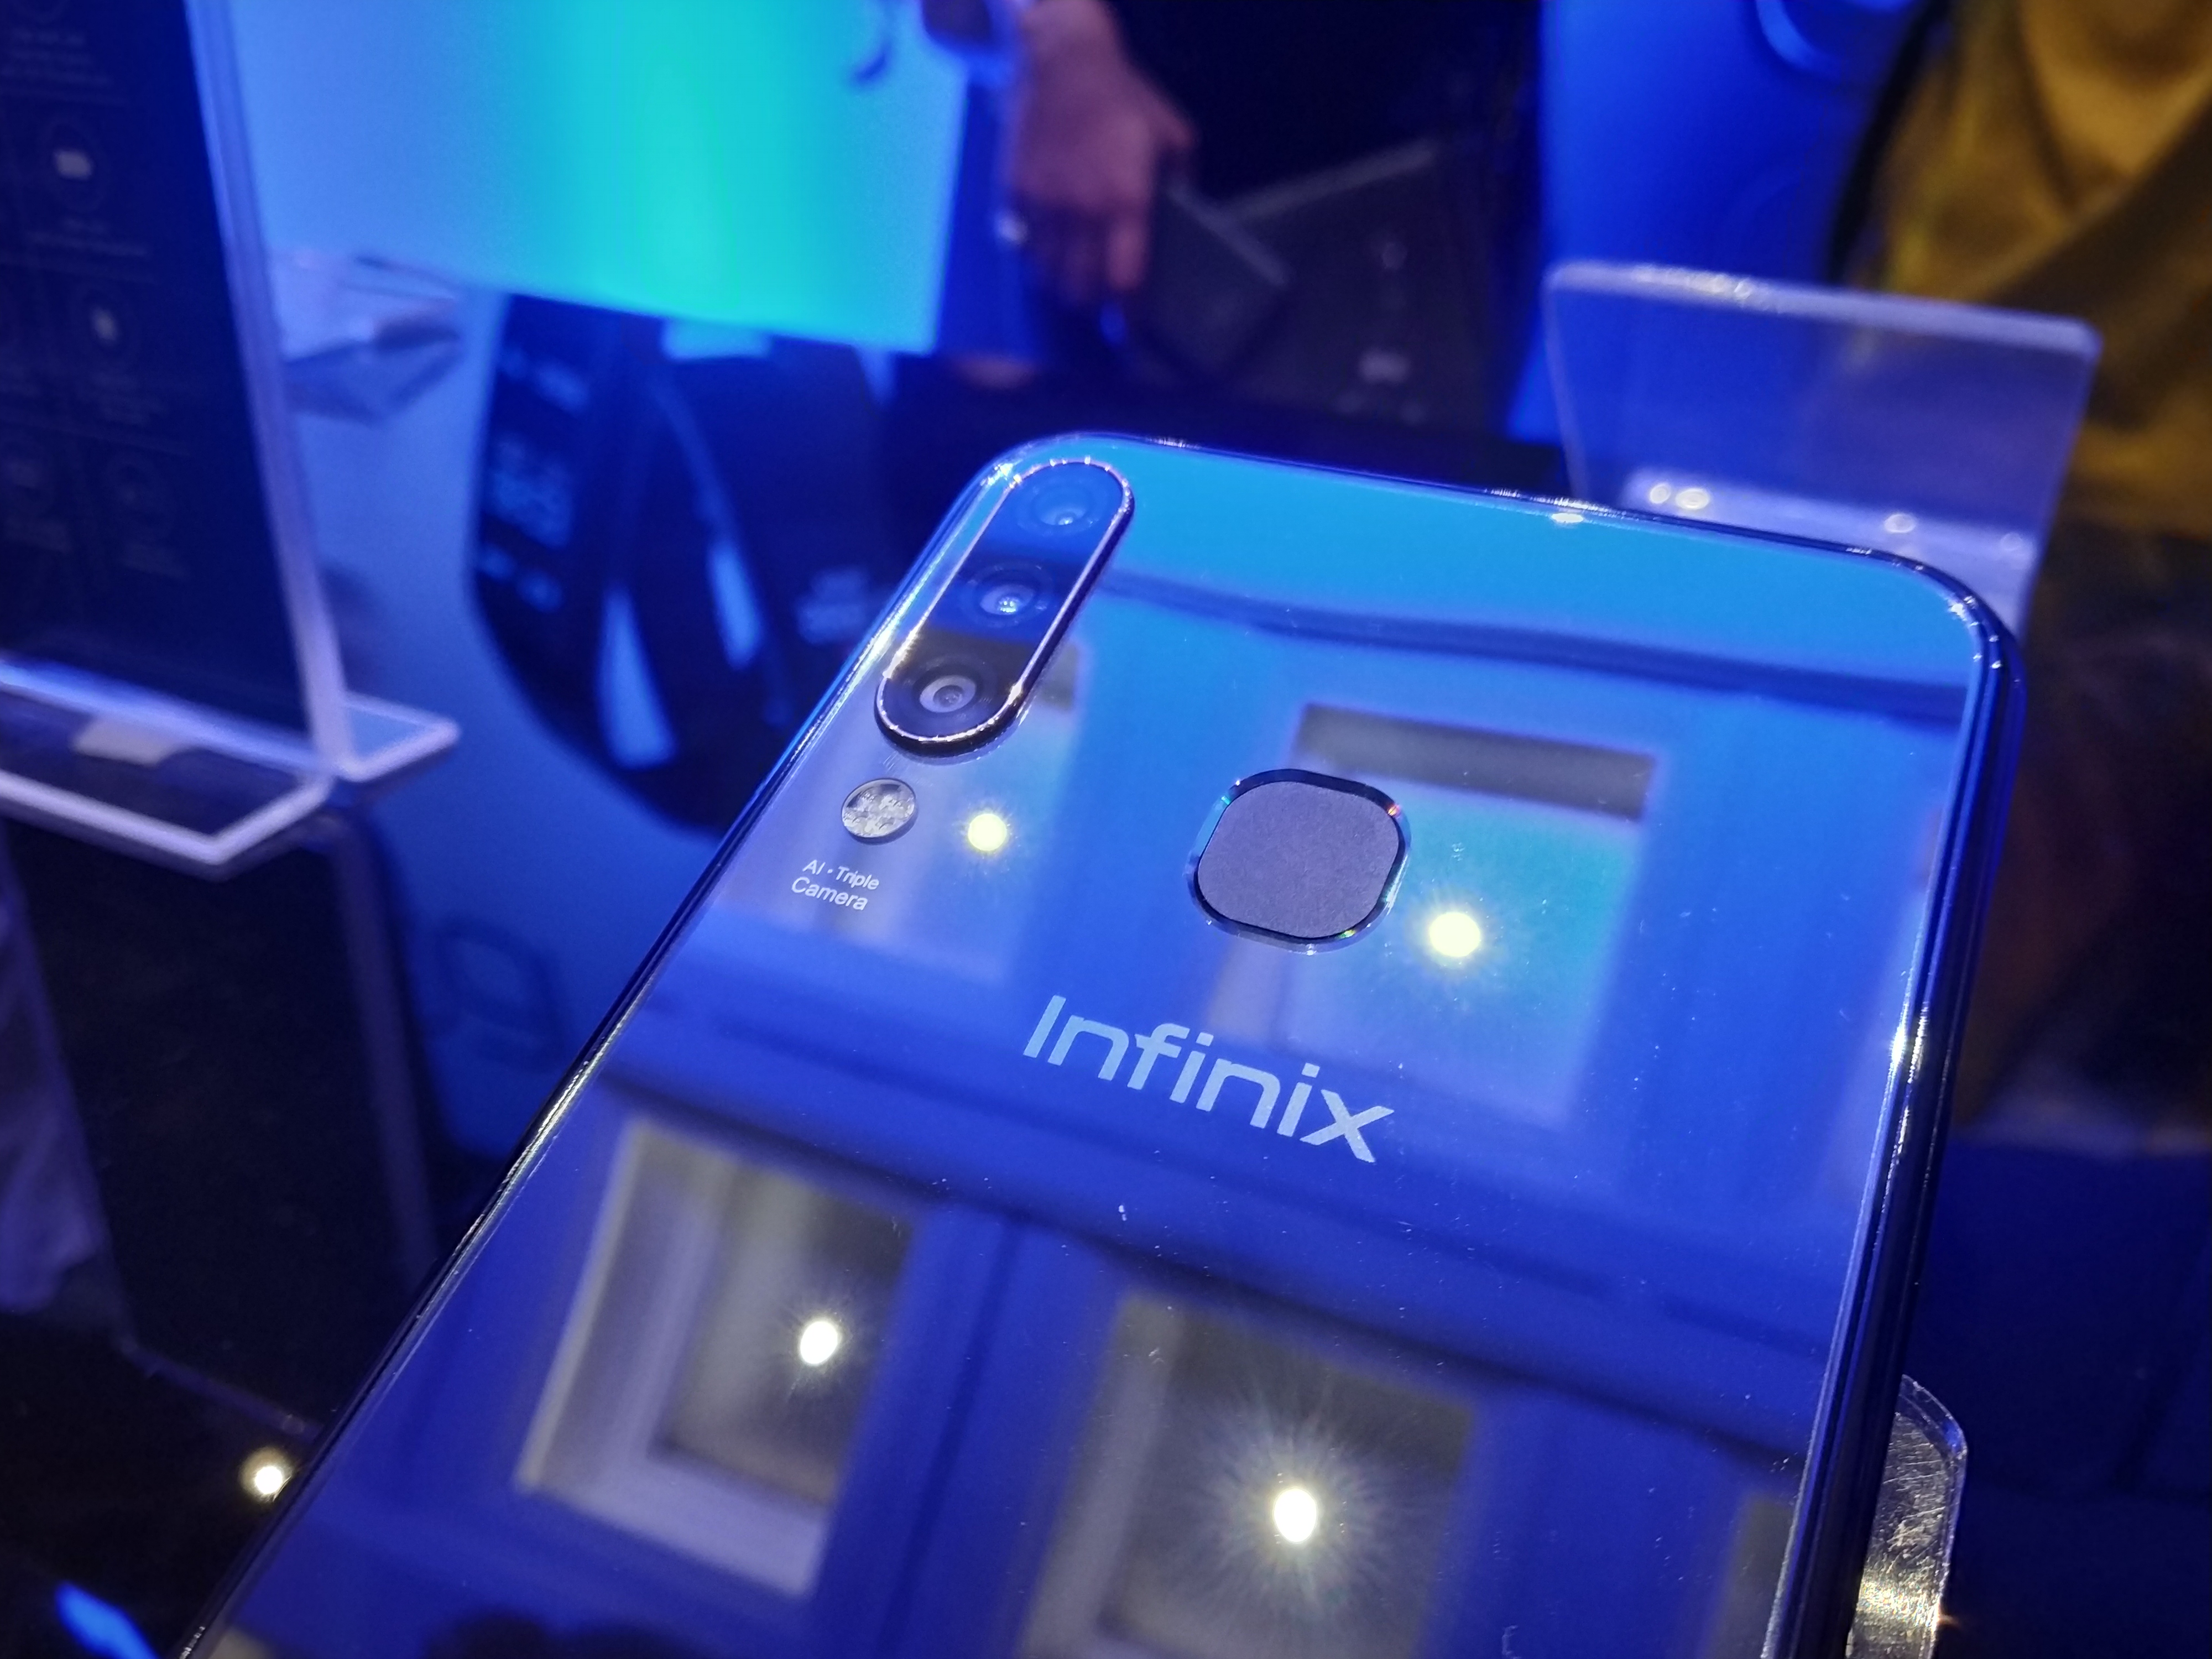 Infinix’s S4 goes on sale via Flipkart, introduces 32MP selfie camera and AI-enabled triple rear camera with 120 0 wide angle lens